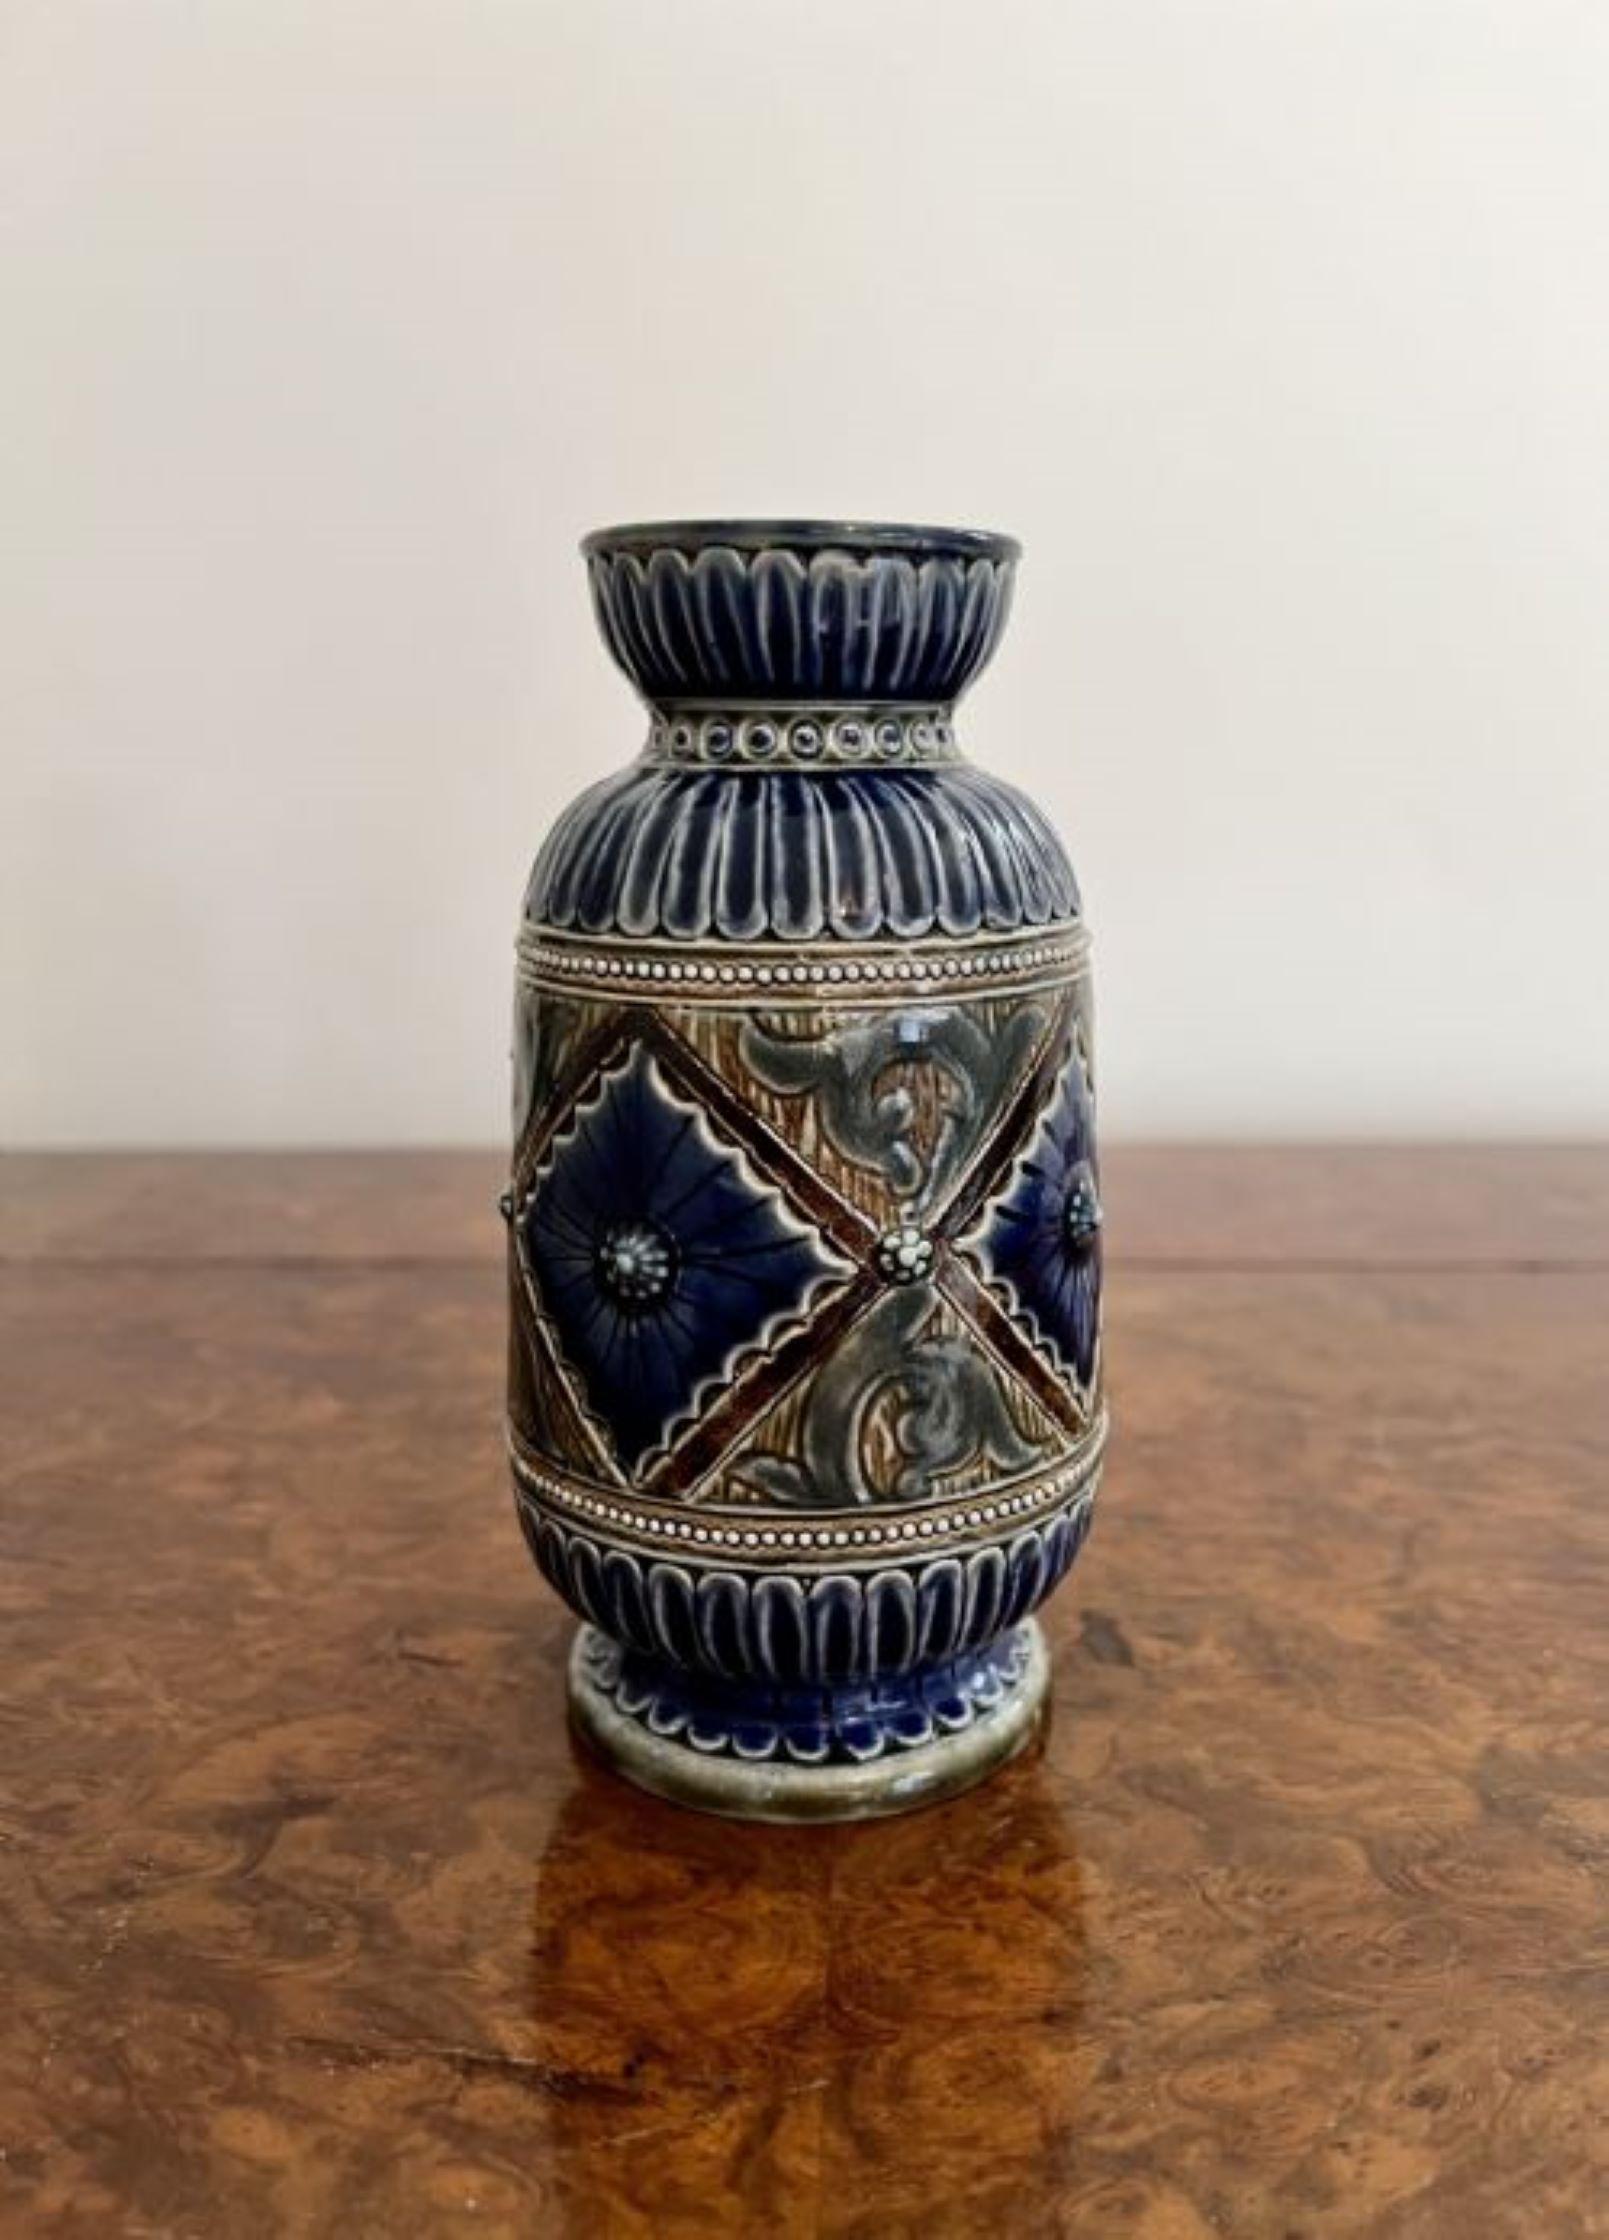 Attractive pair of quality antique Victorian Doulton Lambeth vases having a attractive pair of antique Victorian Doulton Lambeth stone ware vases, decorated with geometric incised decoration in fantastic green, blue and brown colours, standing on